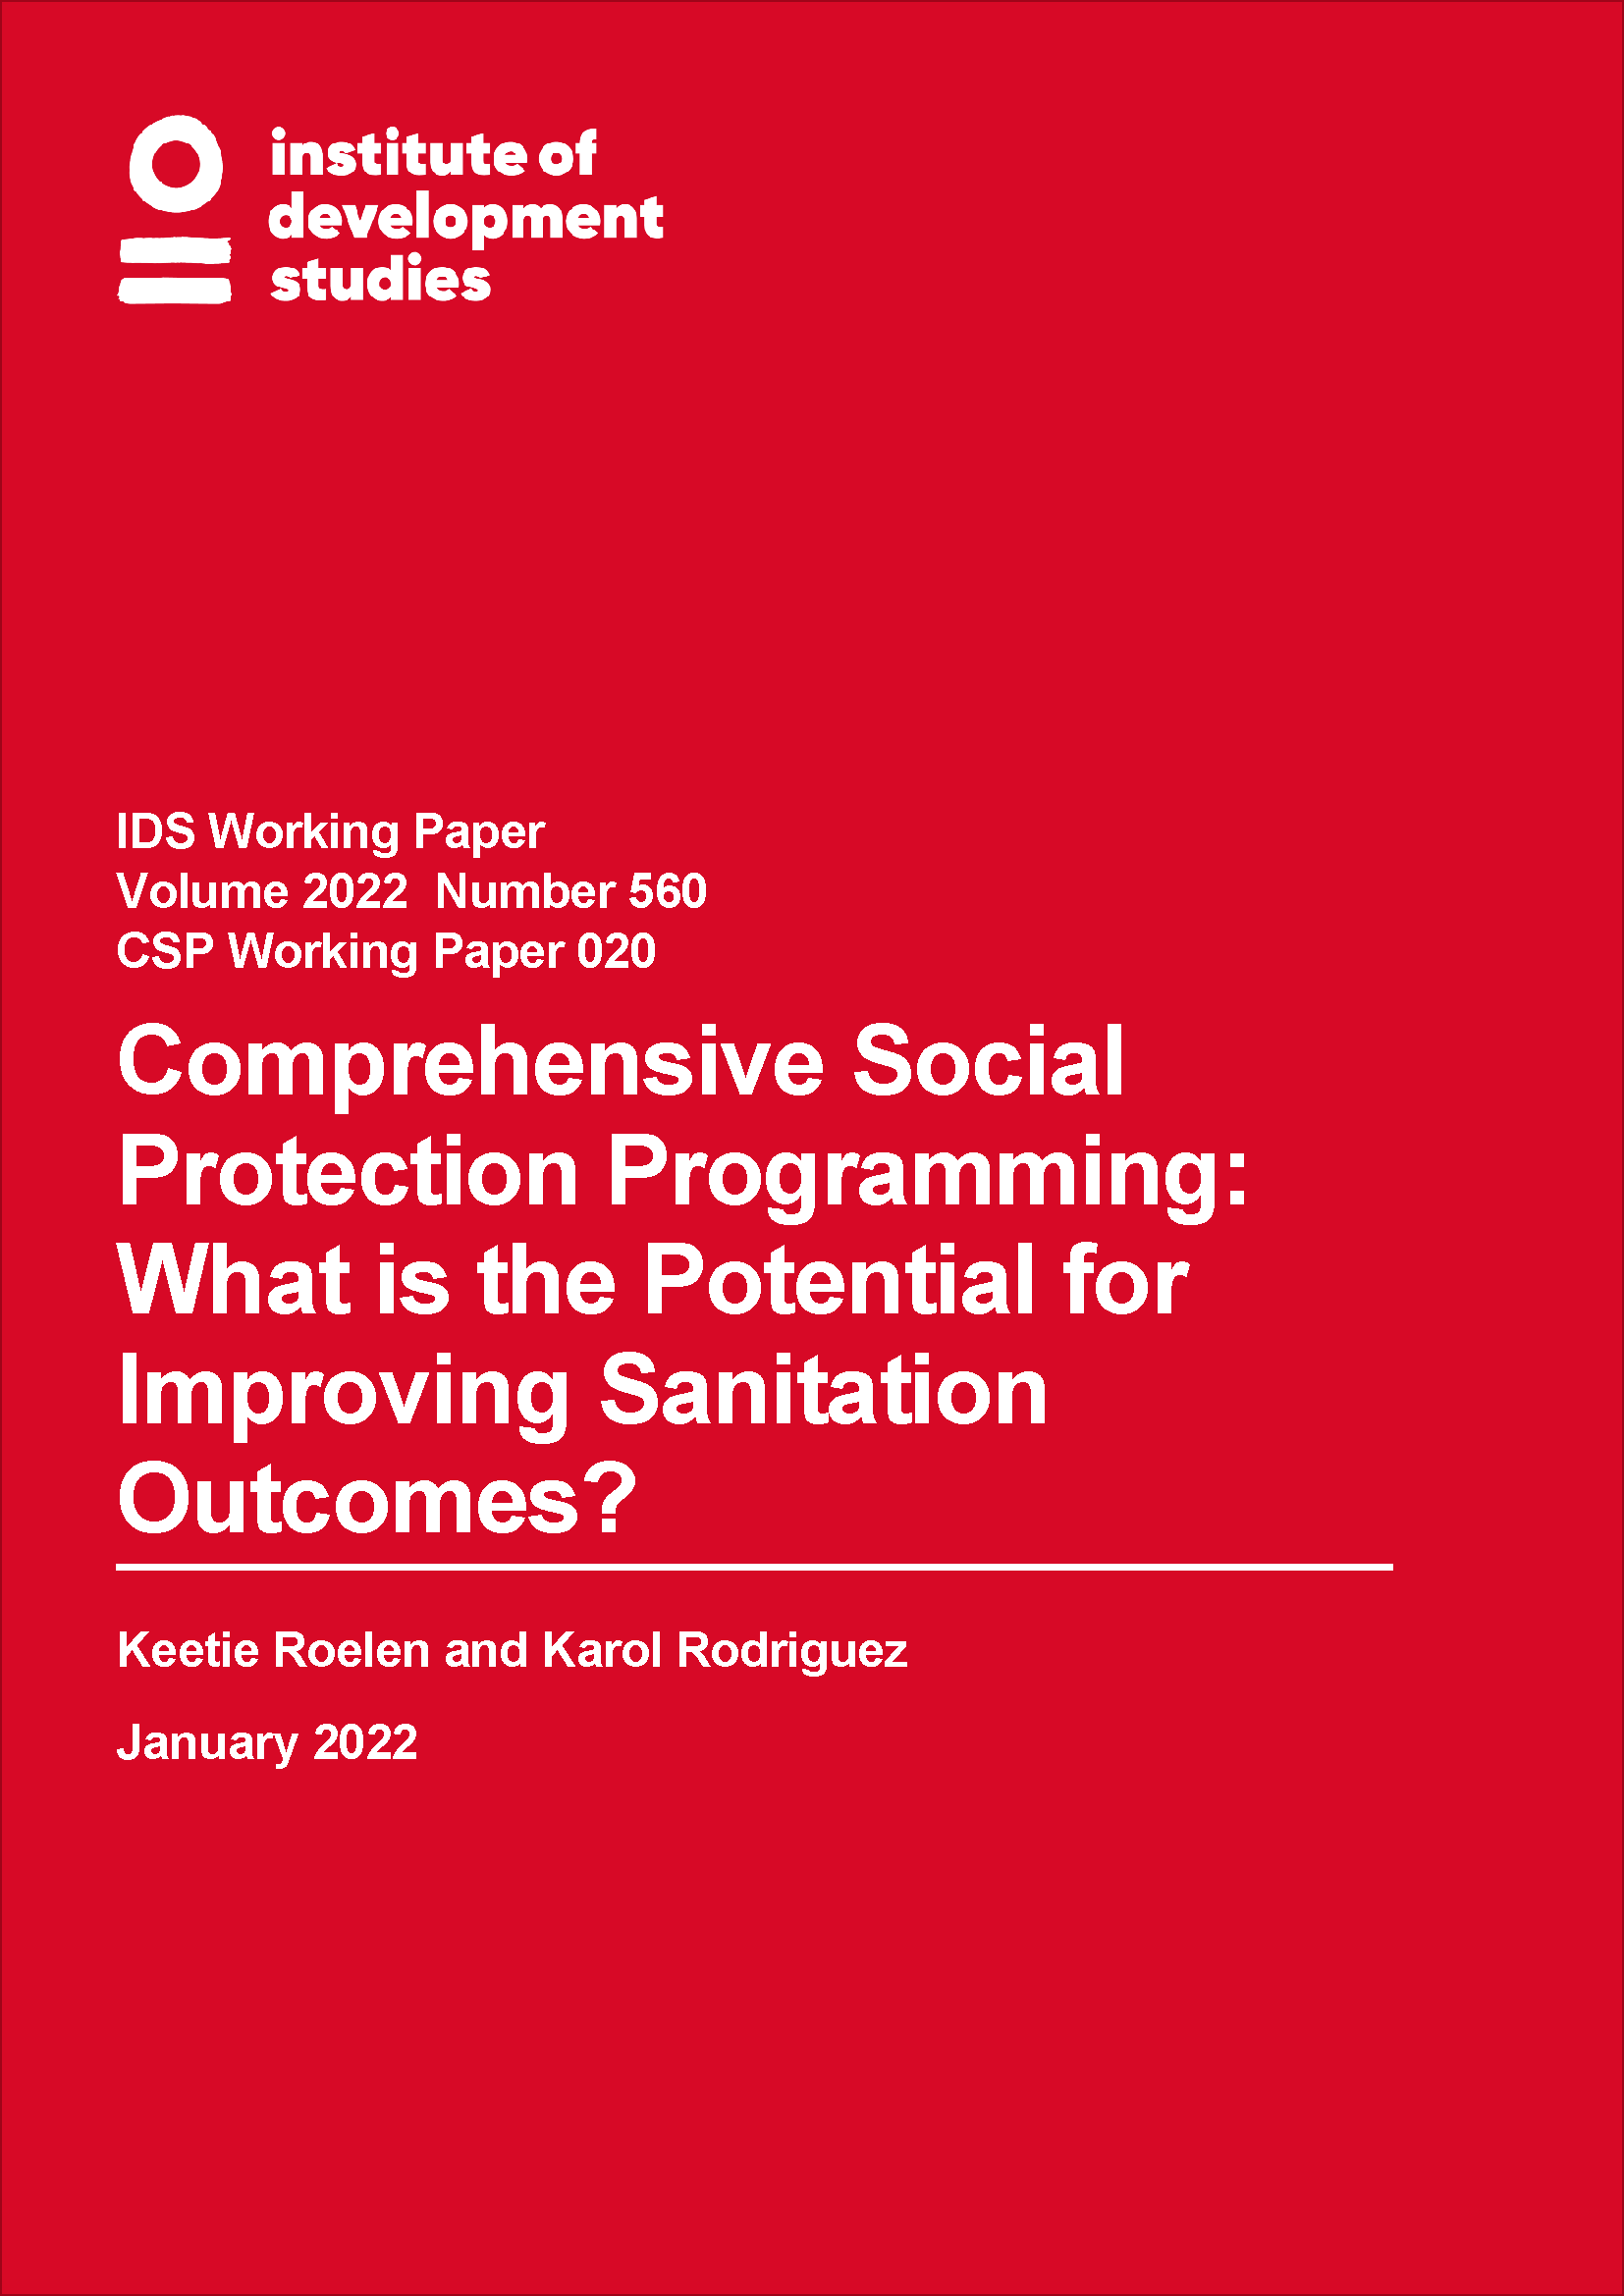 Cover-page for Comprehensive Social Protection Programming: What is the Potential for Improving Sanitation Outcomes?